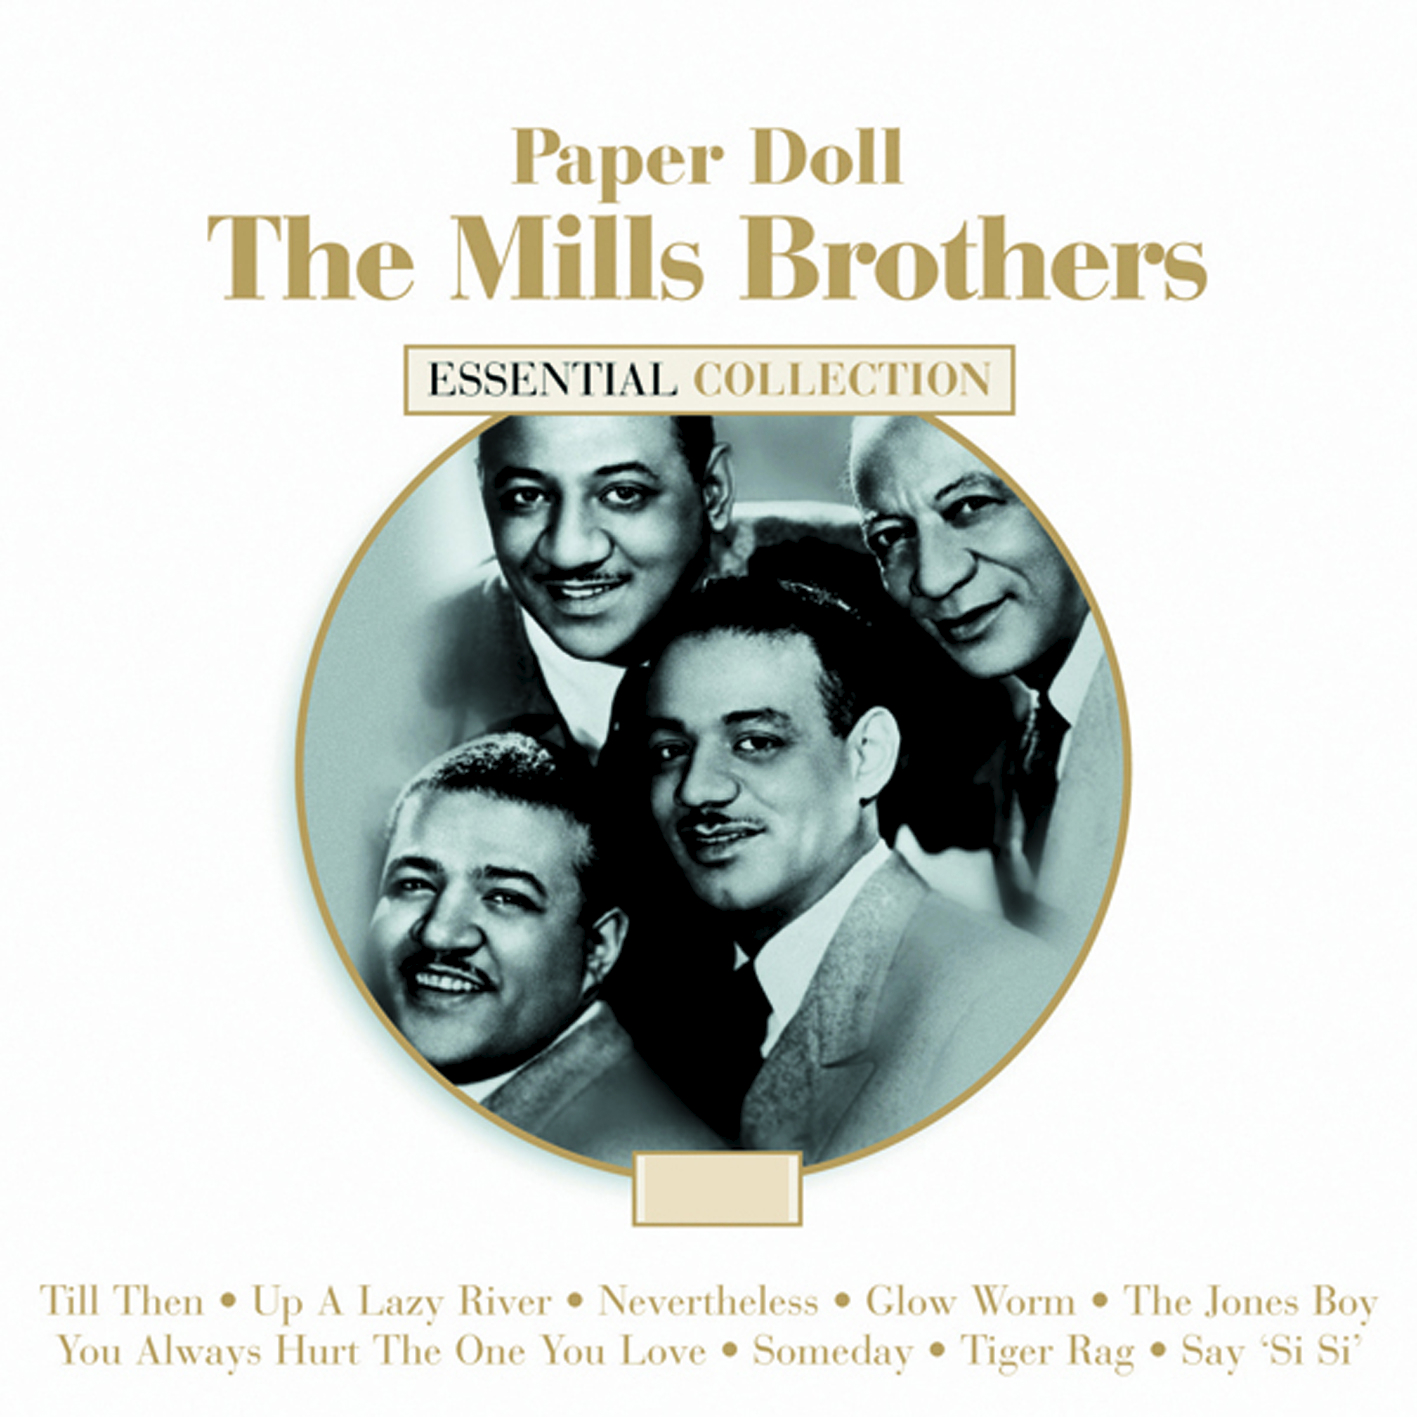 Paper Doll - The Mills Brothers